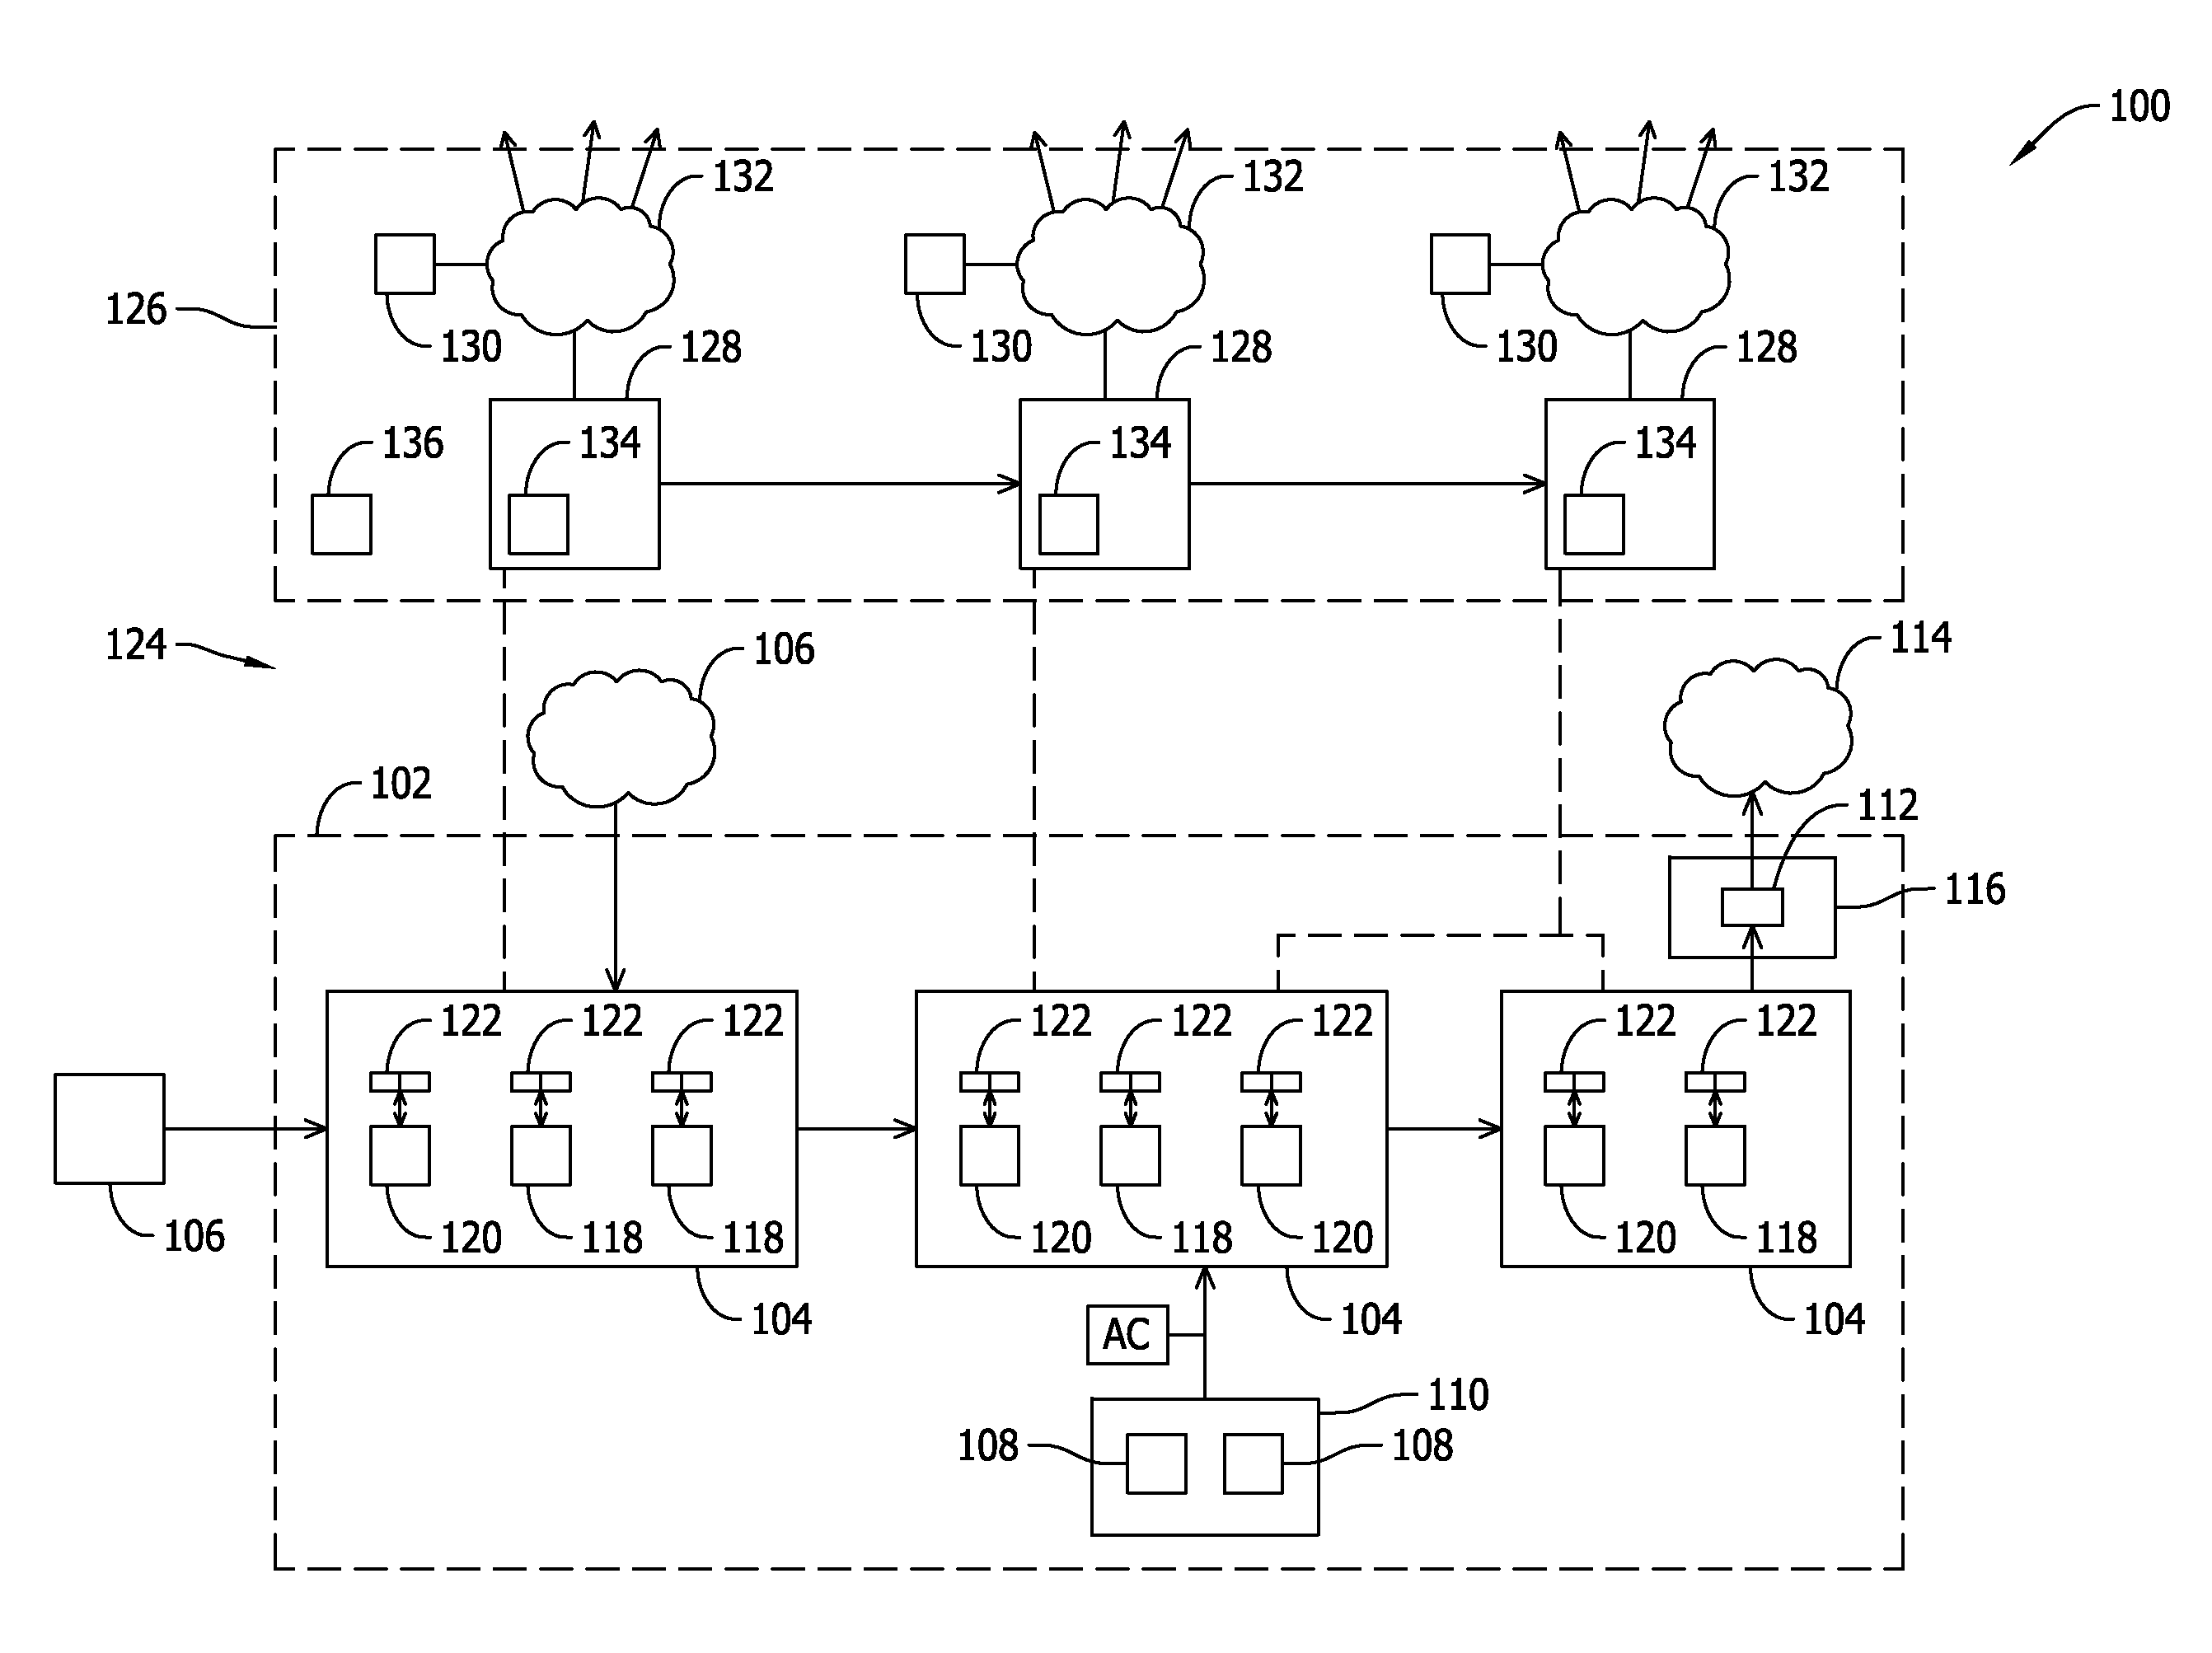 Method and system for an information engine for analytics and decision-making